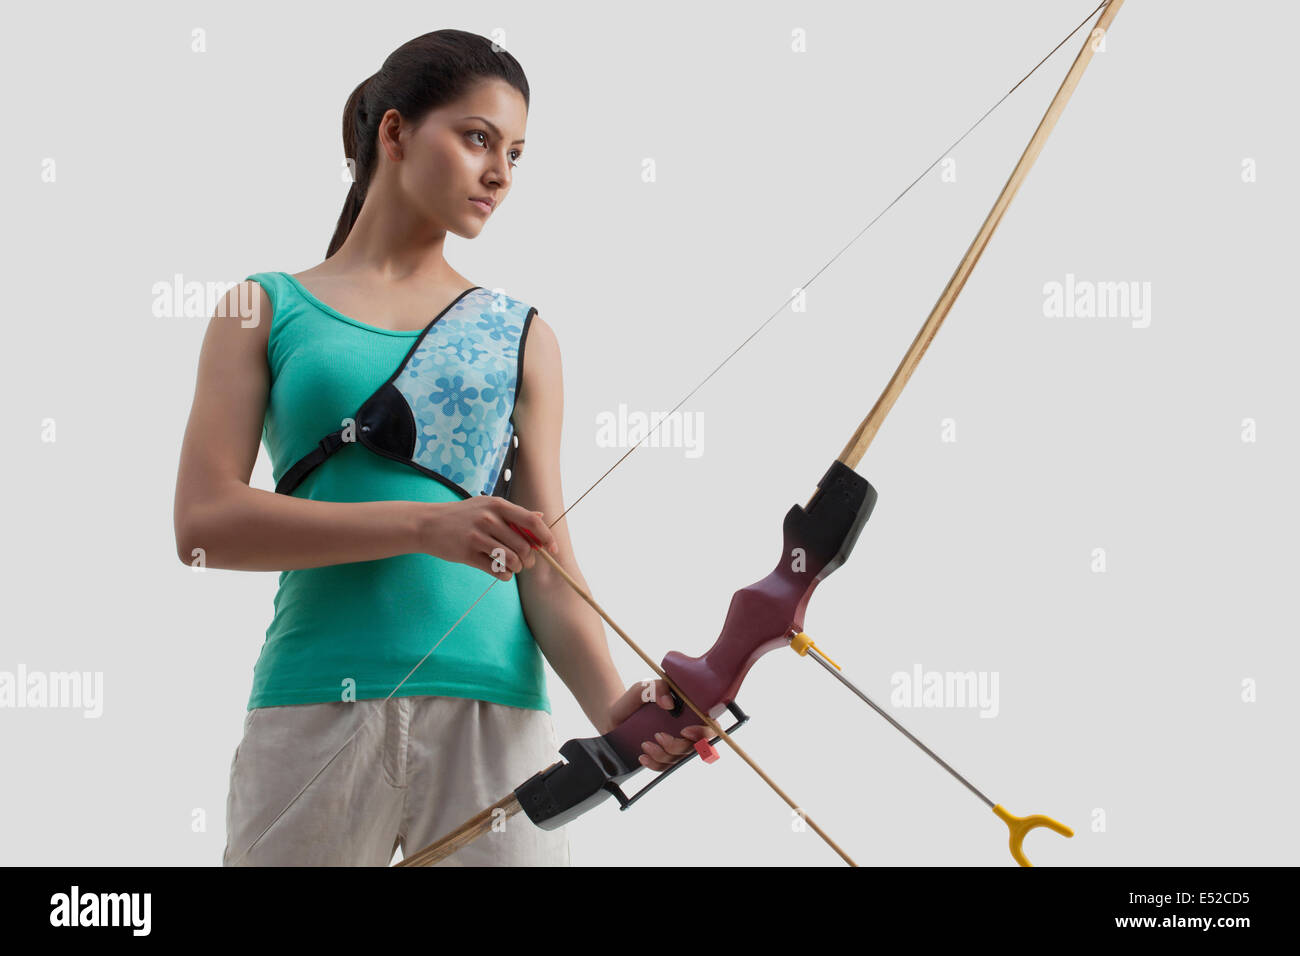 Female archer with bow and arrow isolated over gray background Stock Photo